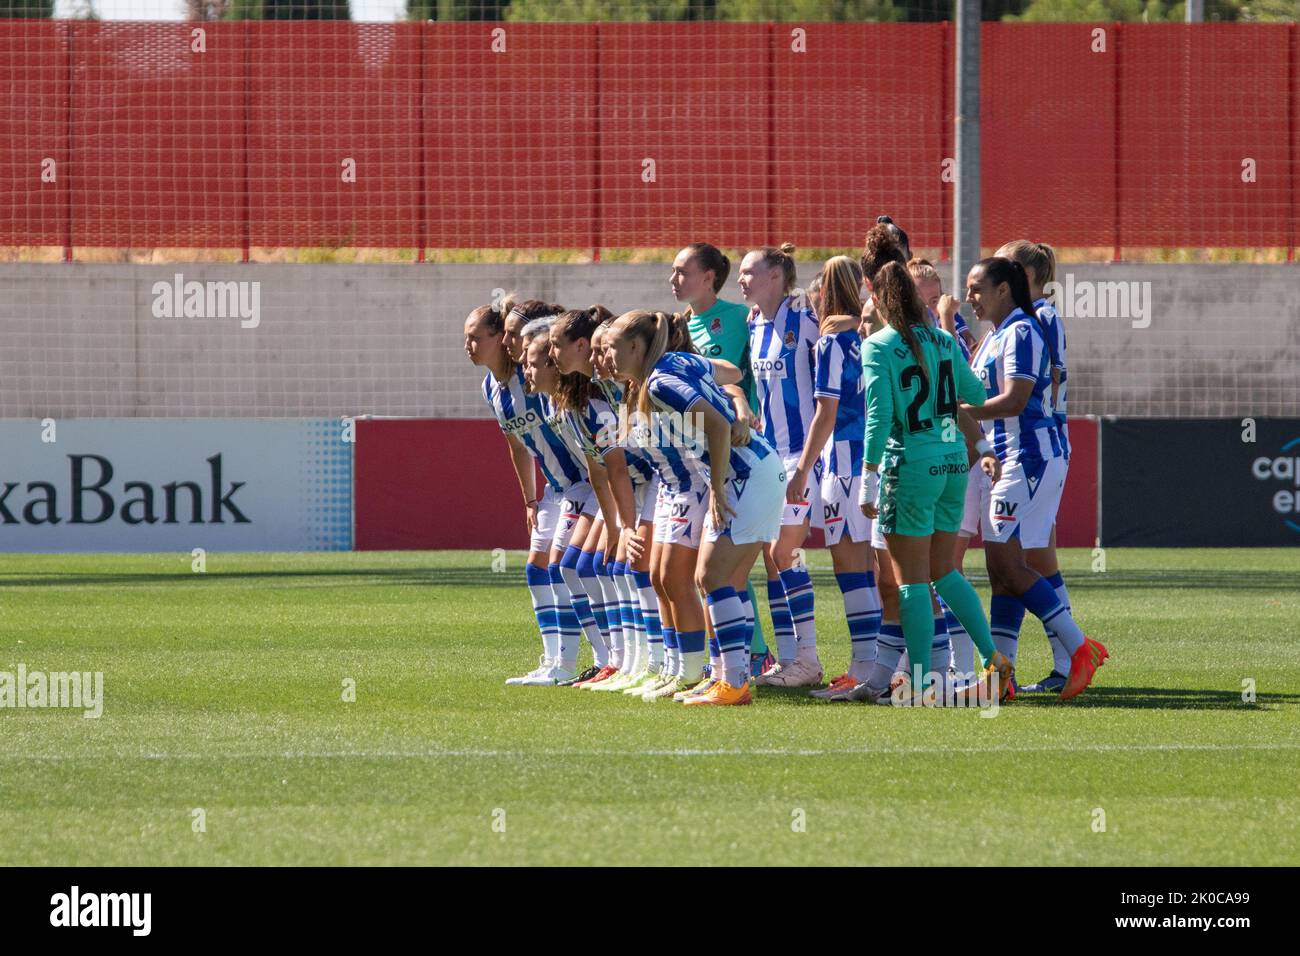 September 10, 2022, AlcalÃ de Henares, Madrid, Spain: Women's football match between Atlético de Madrid female and Real Sociedad female belonging to the first round of the Spanish Women's Professional Football League (Liga F) played at the Wanda AlcalÃ de Henares Sports Centre. The match has been postponed because the female referees have not shown up due to the strike of the referee's collective in which they demand professionalization and better working conditions. In the end, both teams stayed on the pitch for training. (Credit Image: © Alvaro Laguna/Pacific Press via ZUMA Press Wire) Stock Photo